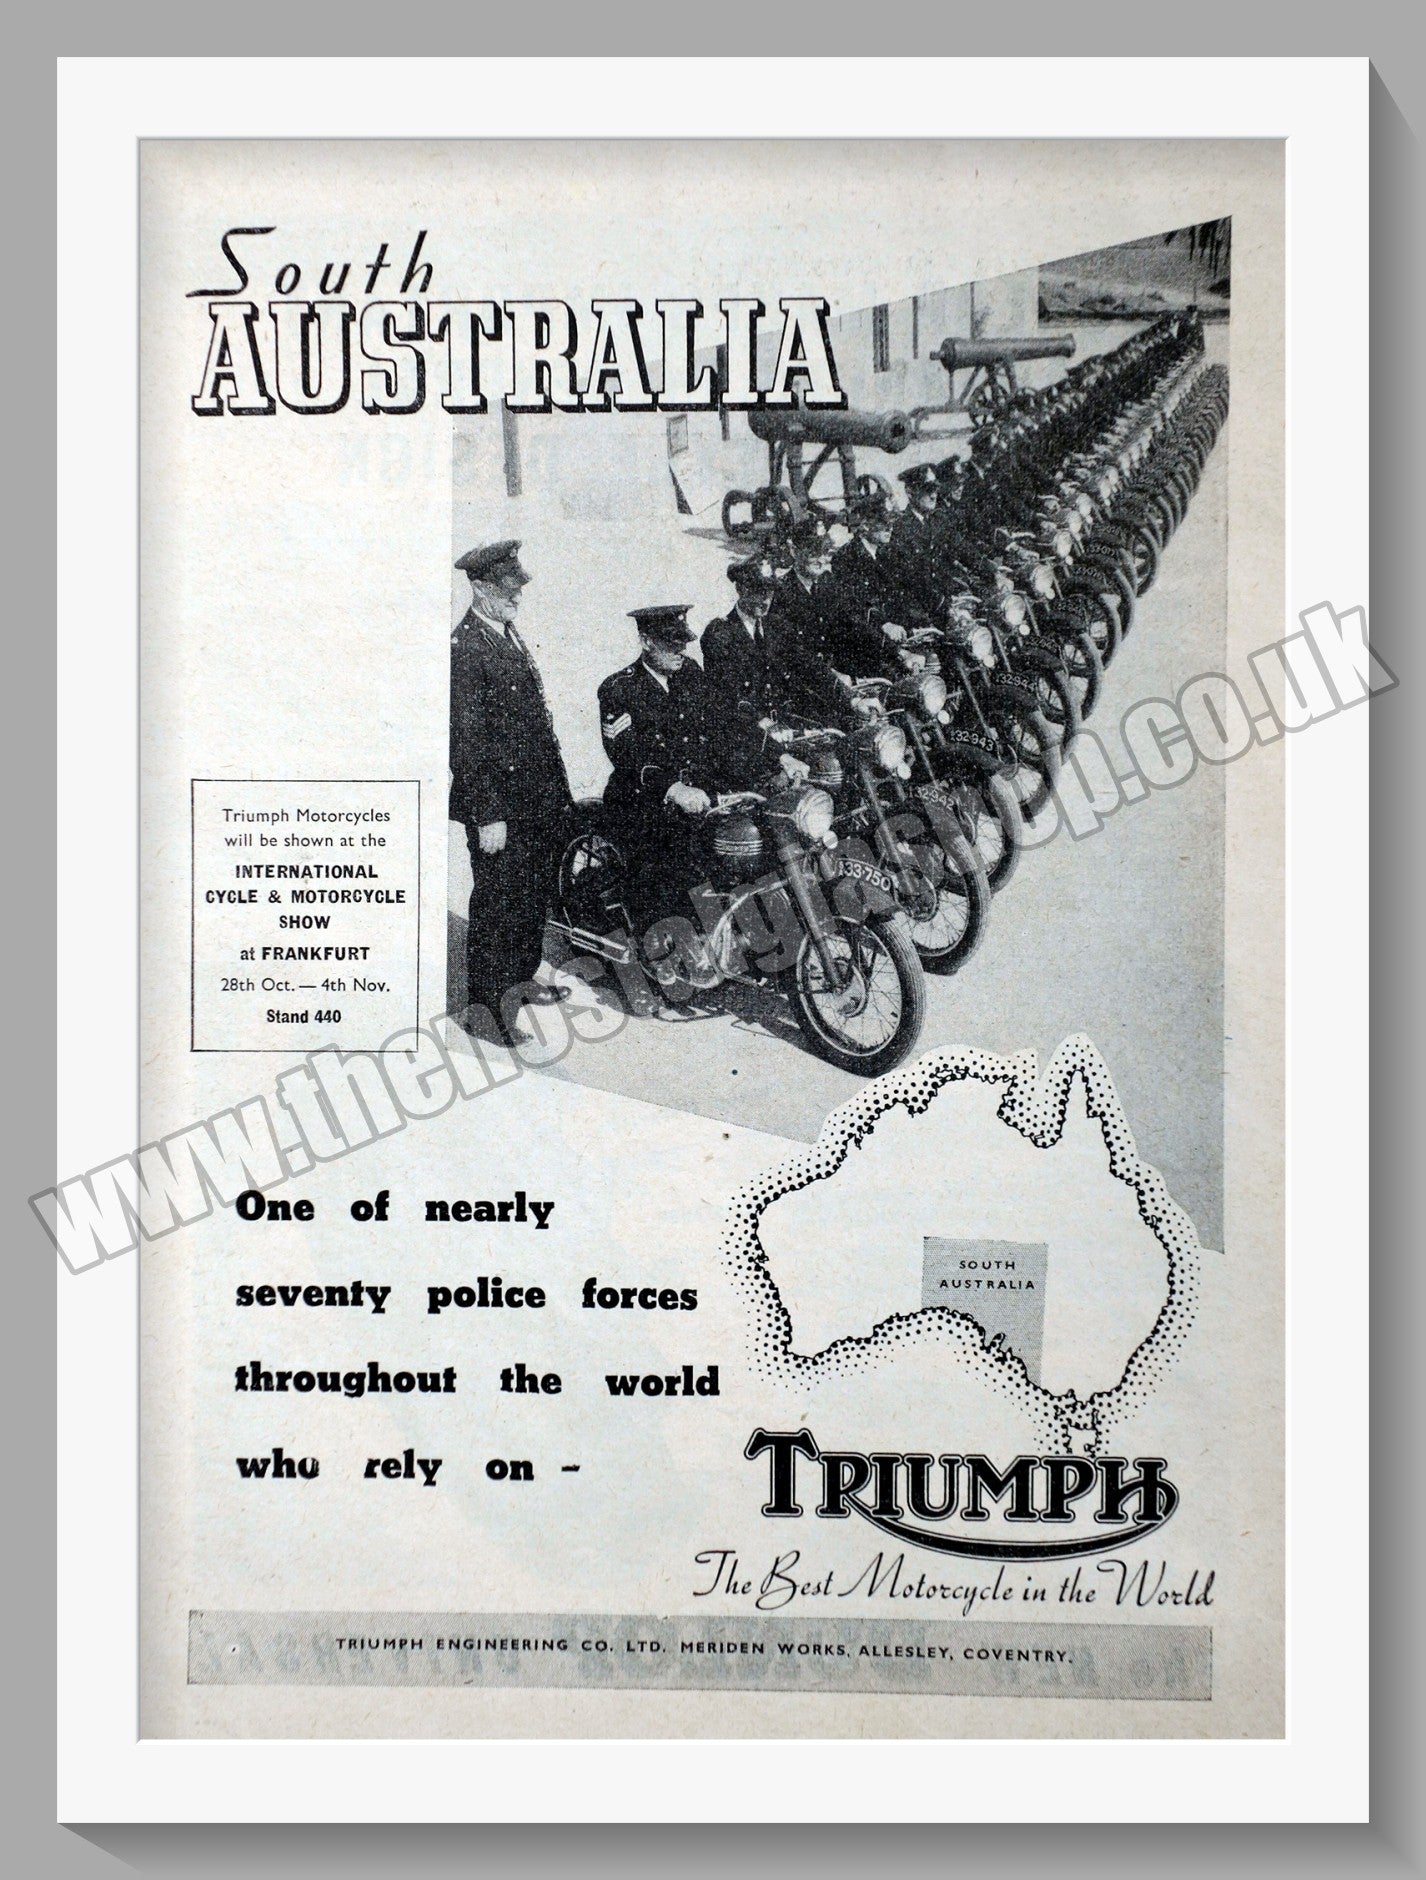 Triumph Motorcycles for the Police in South Australia. Original advert 1951 (ref AD57897)